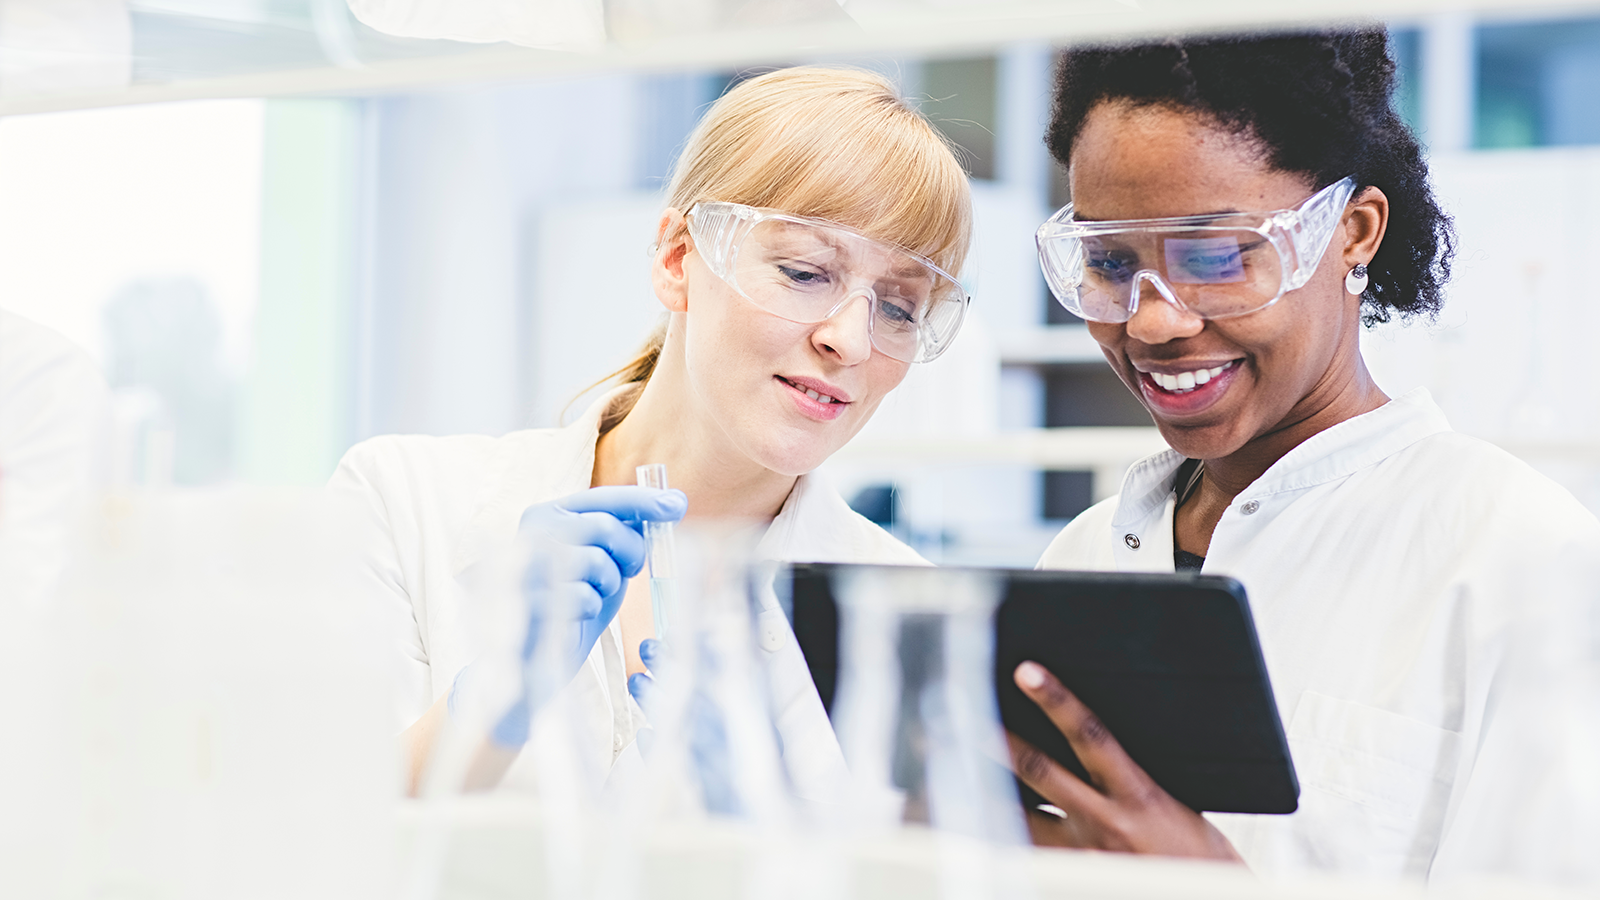 Two female scientists wearing goggles consulting on lab results